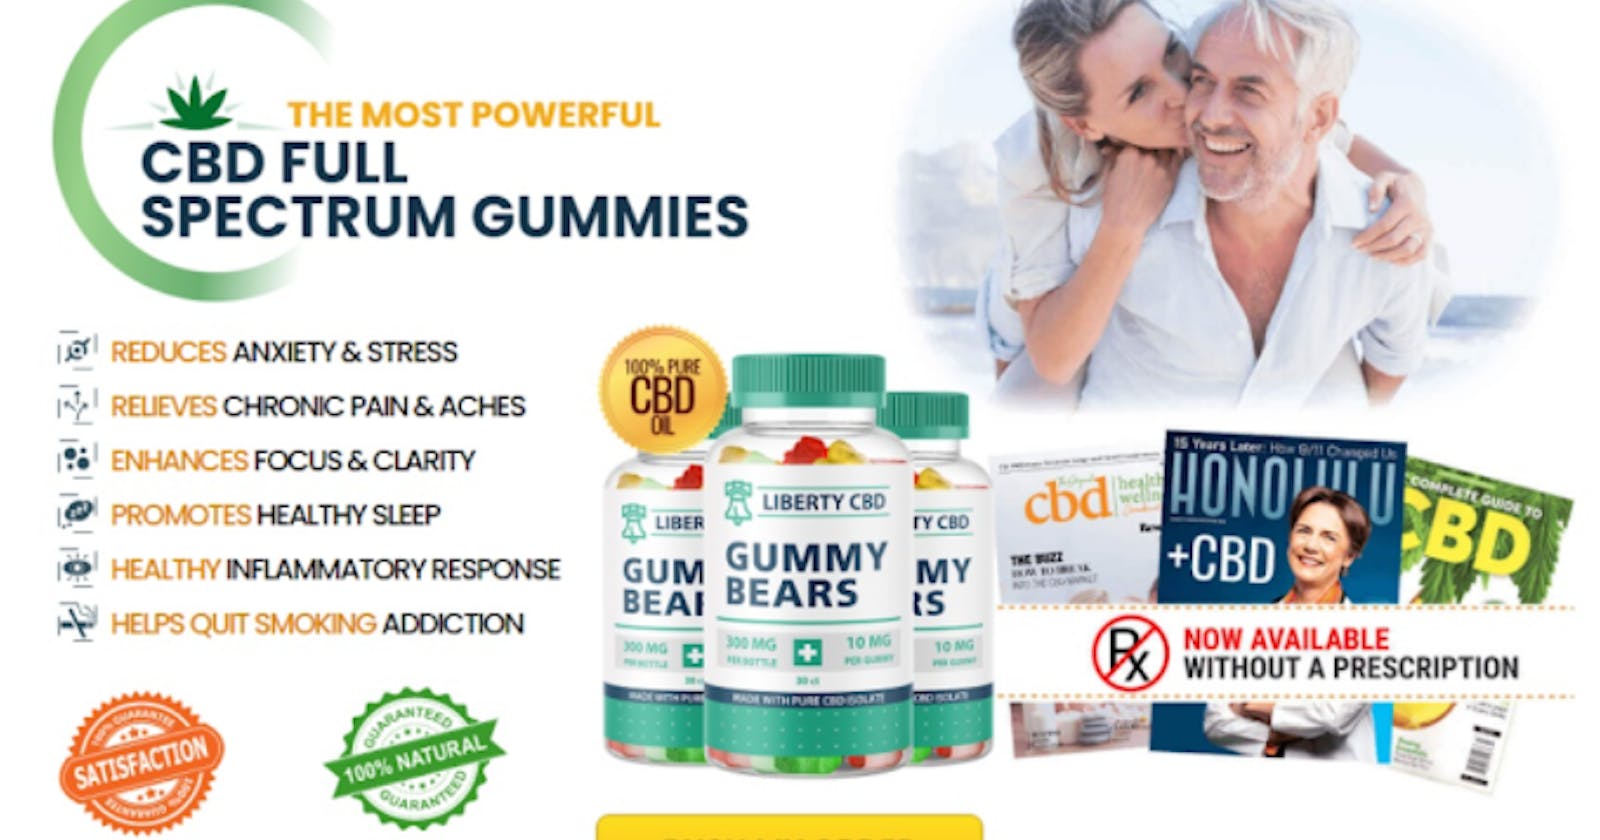 Liberty CBD Gummies Reviews Official Website Real Benefits or Side Effects? | Special Offer